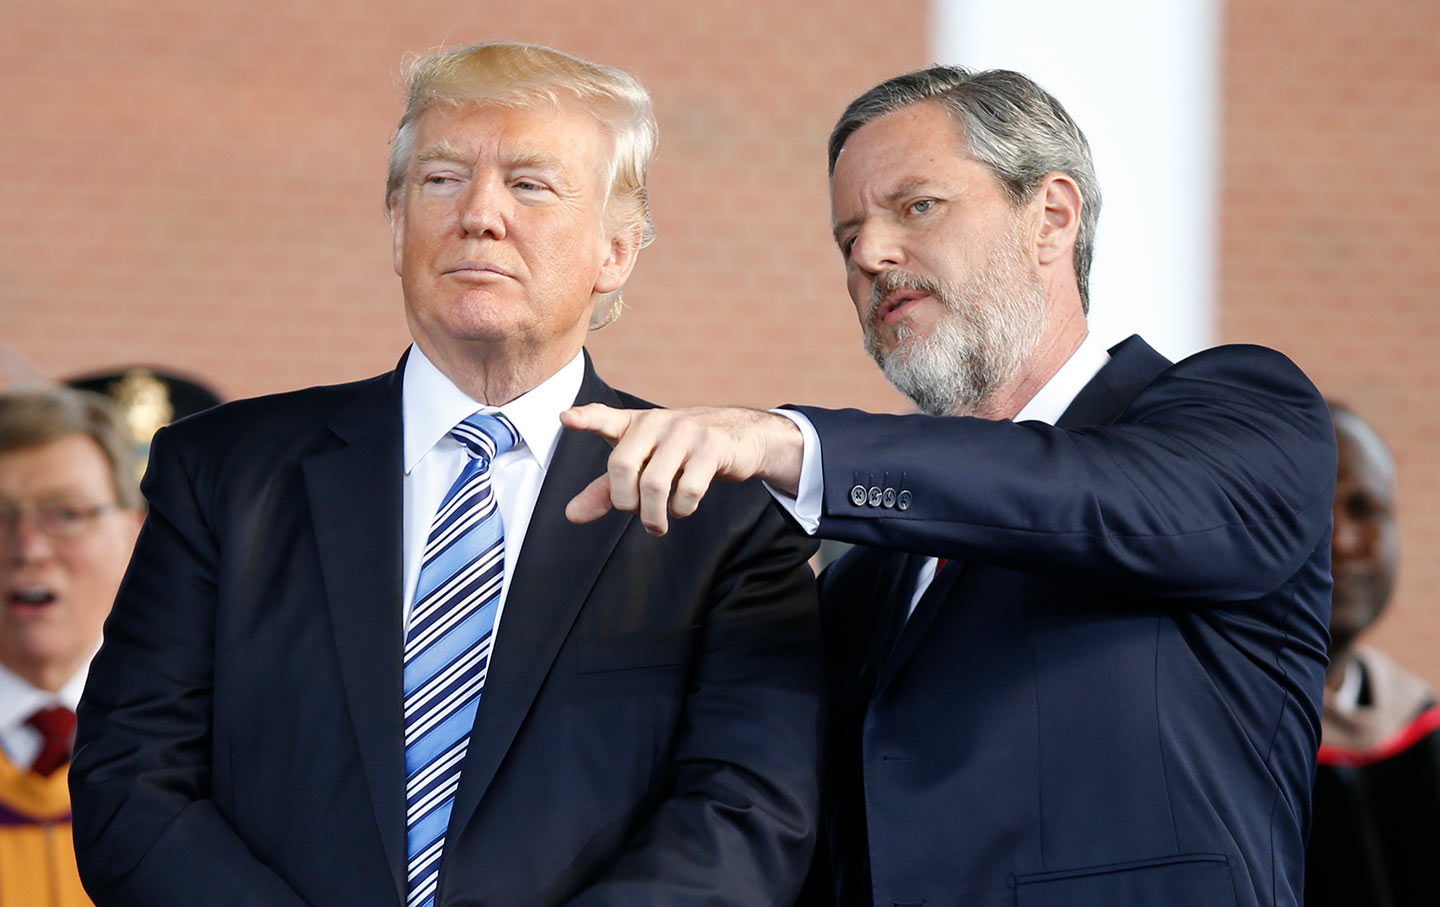 Donald Trump and Jerry Falwell